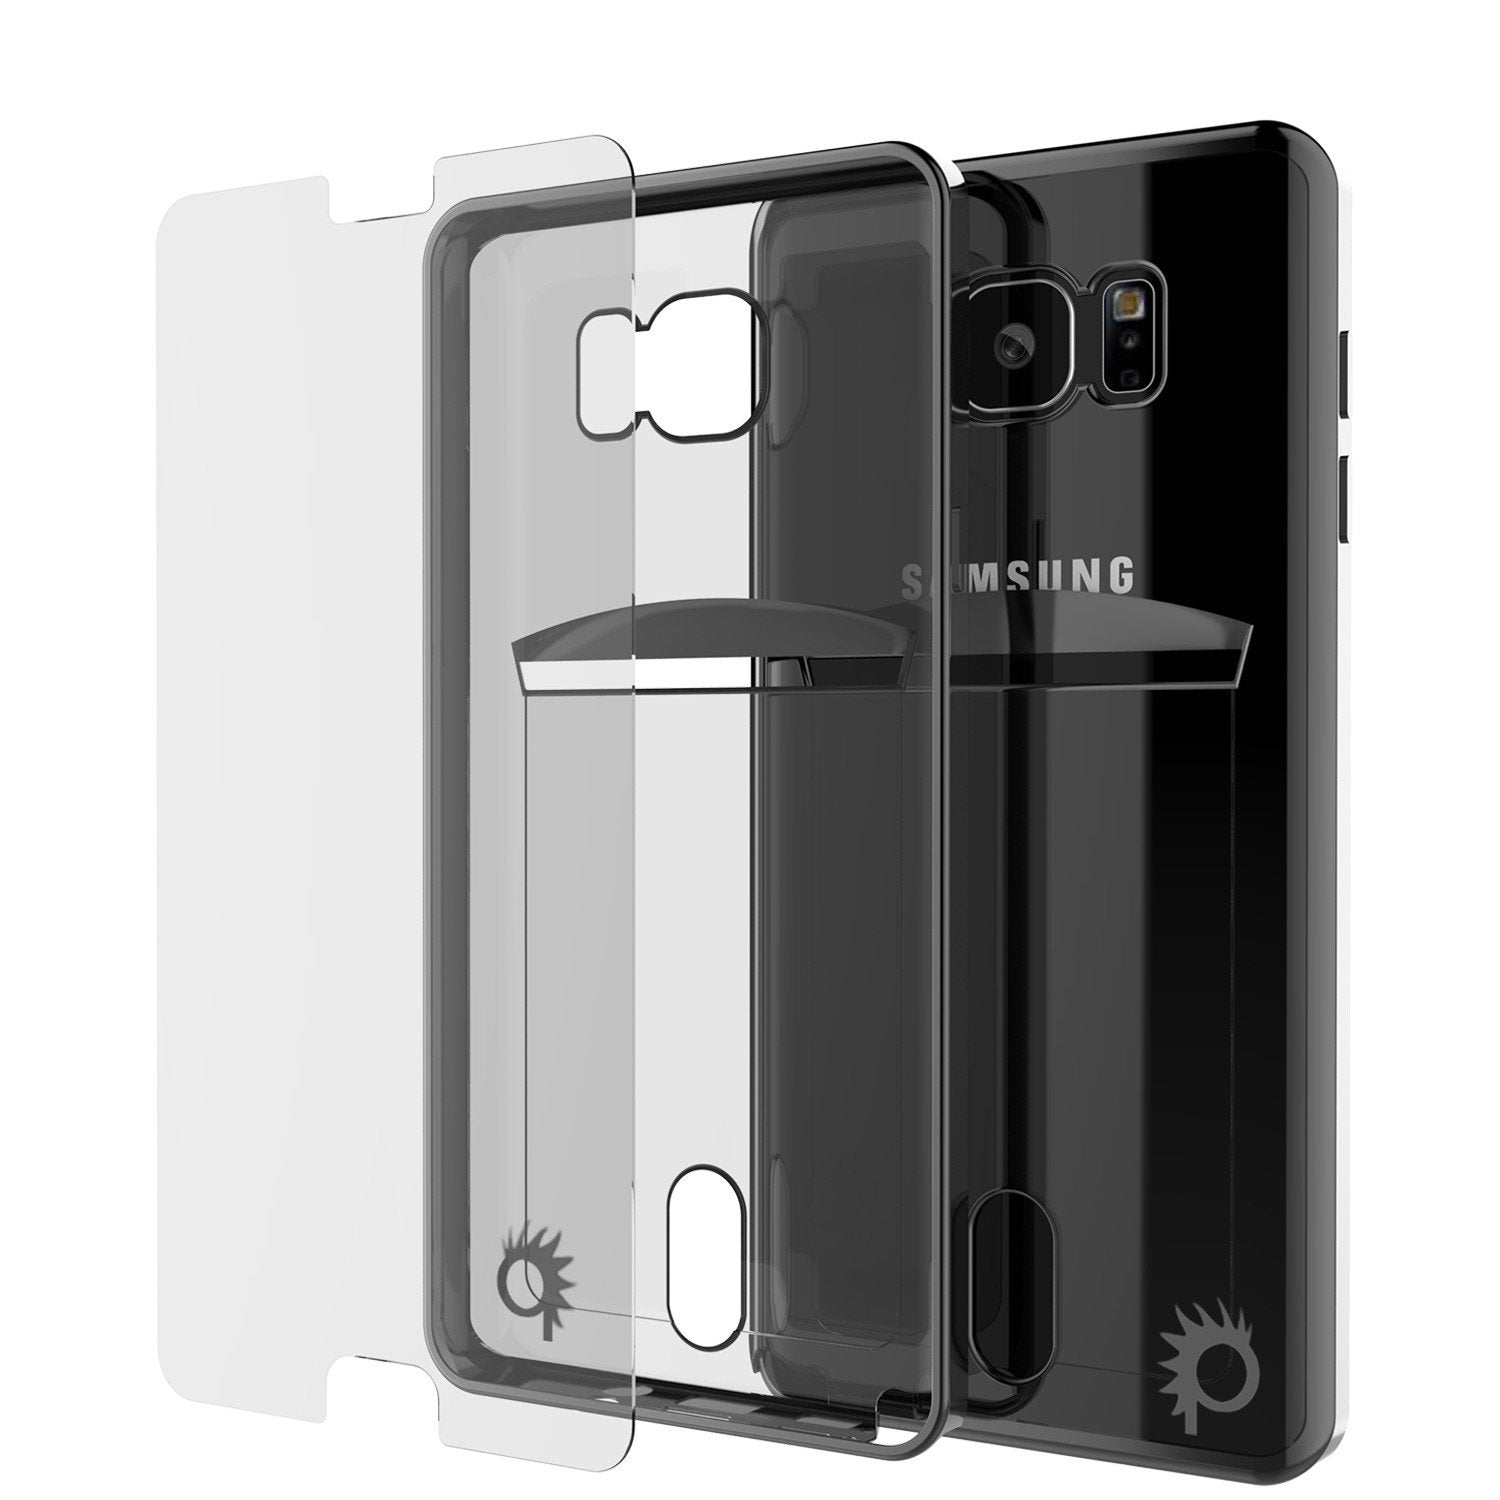 Galaxy Note 5 Case, PUNKCASE® LUCID Black Series | Card Slot | SHIELD Screen Protector | Ultra fit